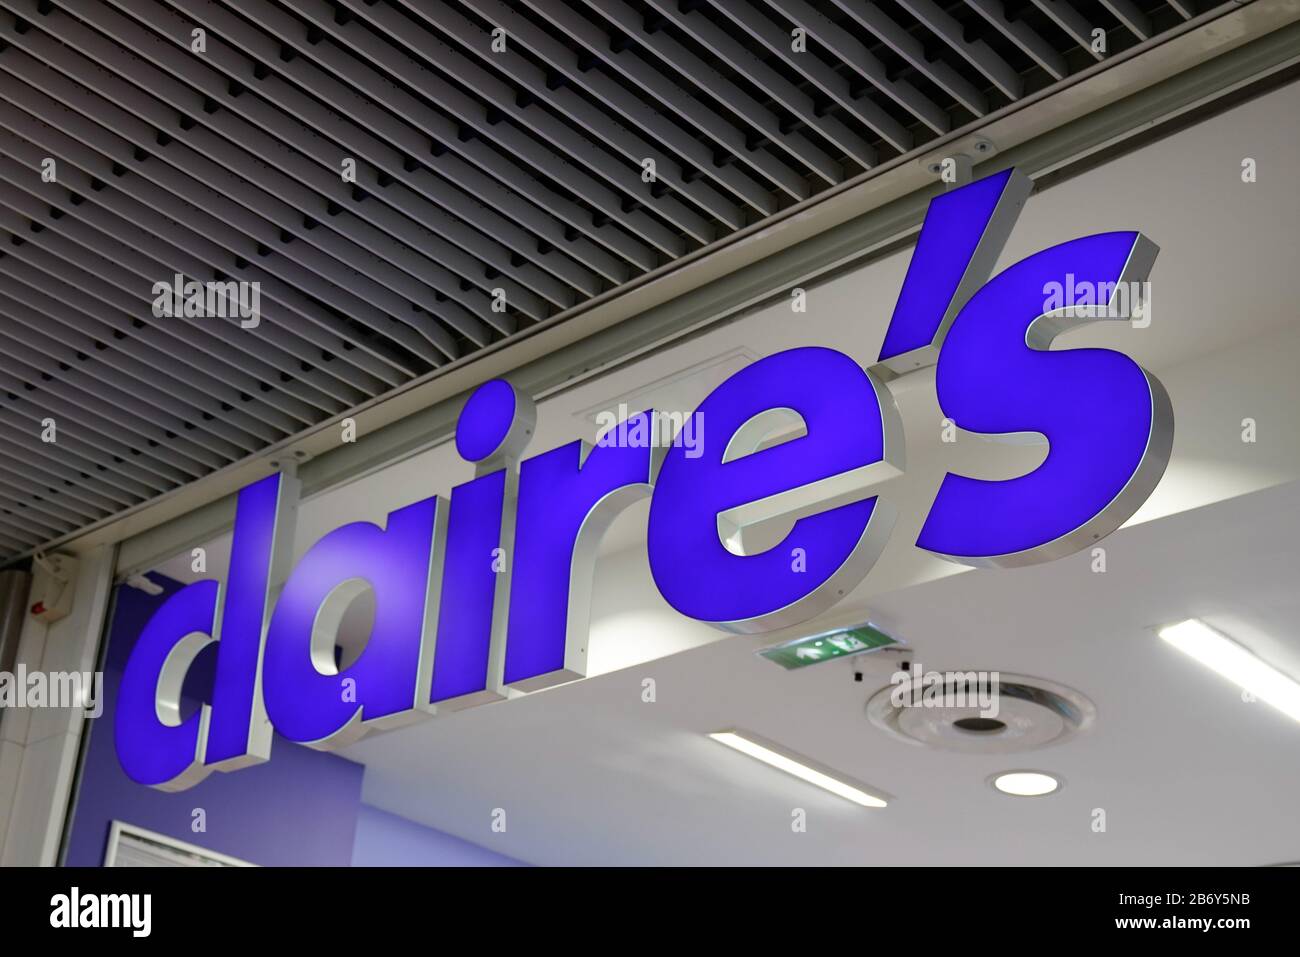 Bordeaux , Aquitaine / France - 12 04 2019 : Claires store sign logo Claire's American retailer of accessories and jewelry girls and teenagers shop Stock Photo